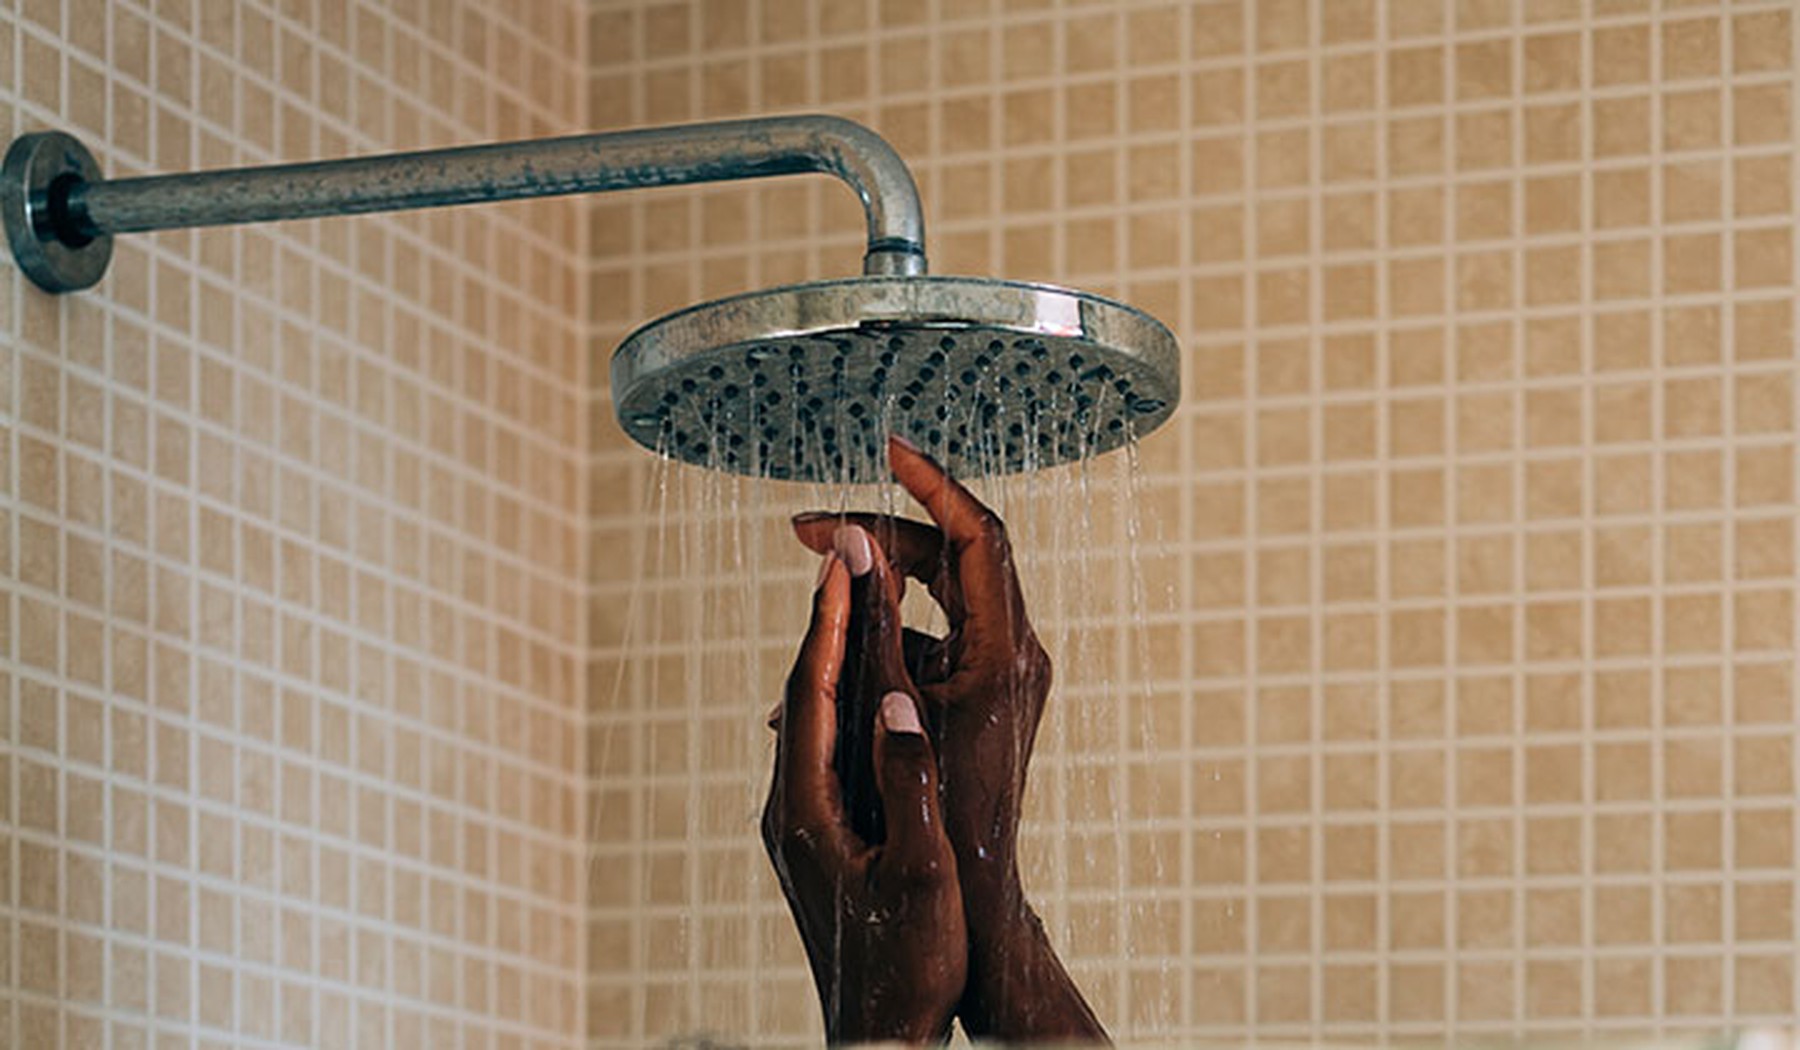 Woman raising her hands to the shower head